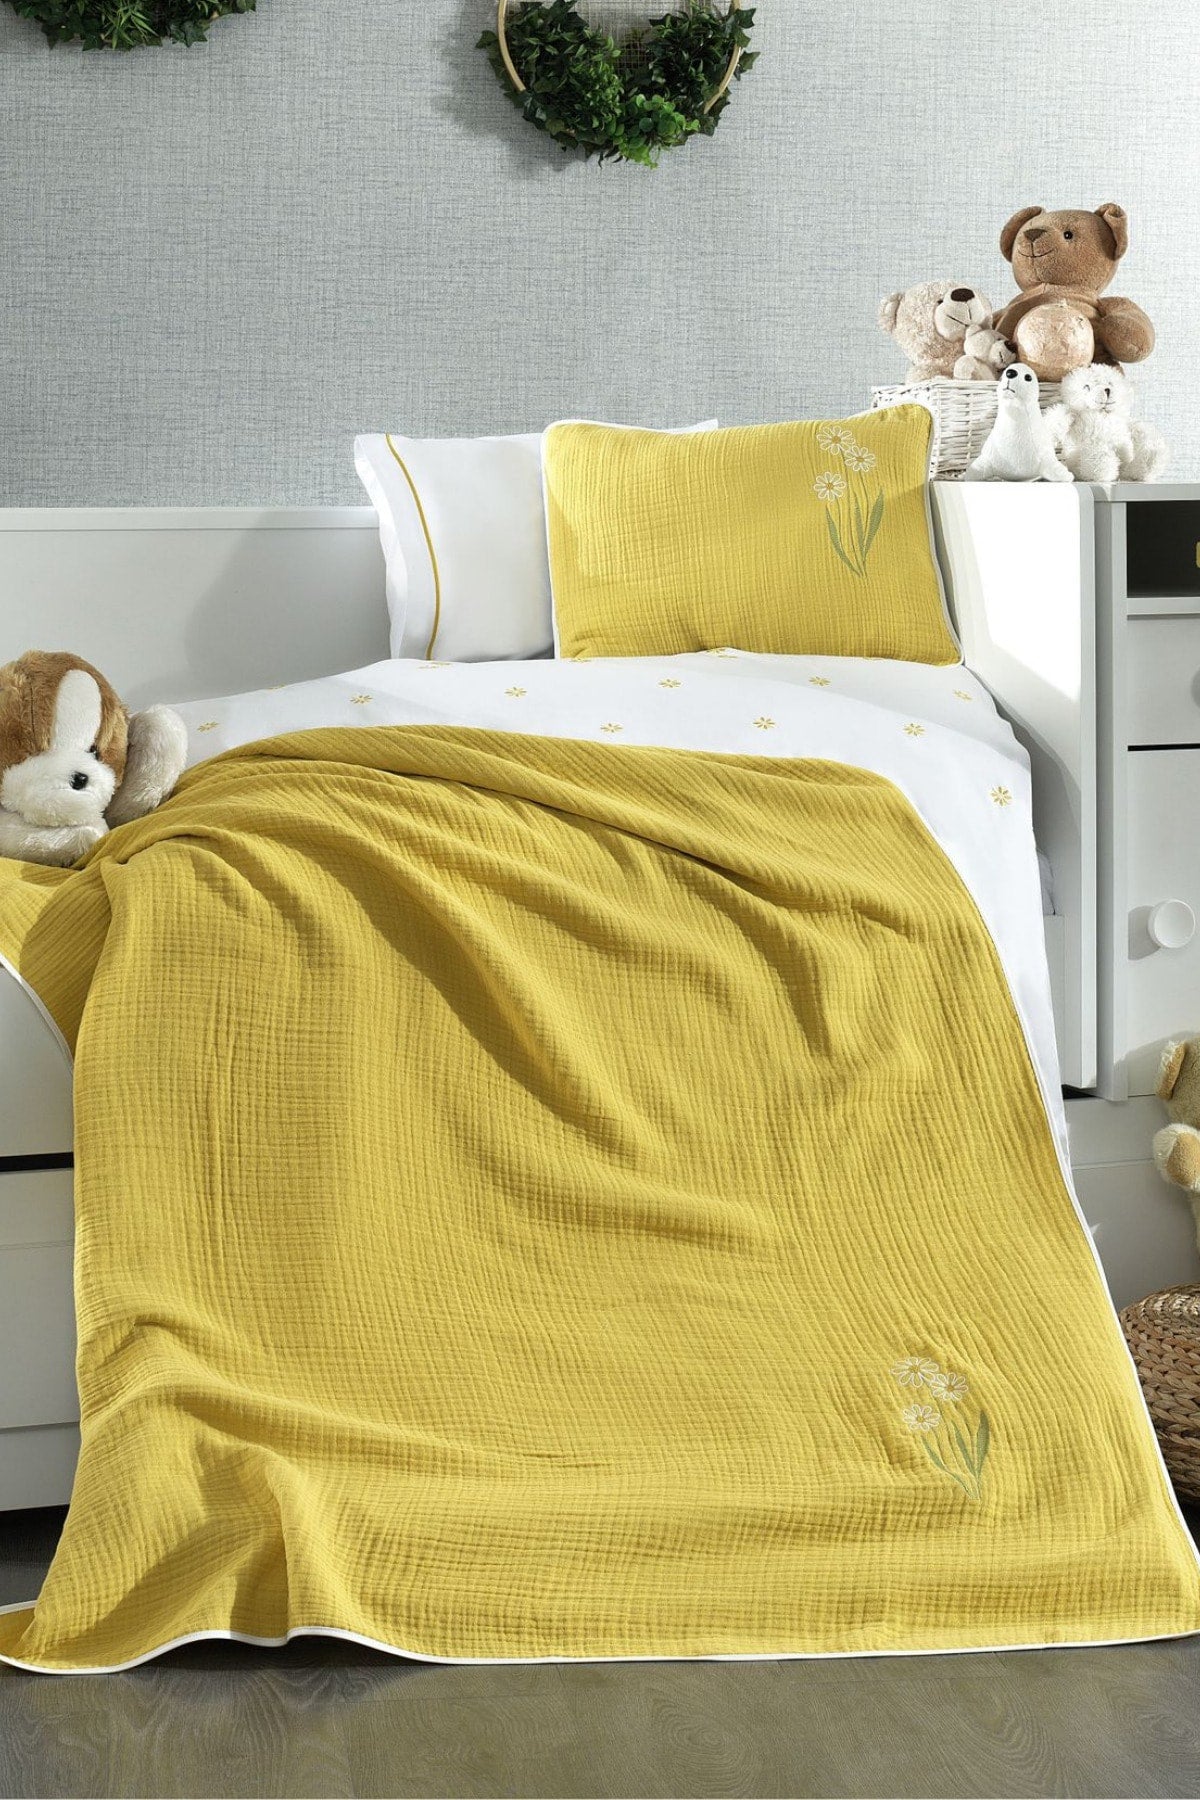 5 Piece Muslin Covered 100% Cotton Daisy Patterned Fairy Tale Mustard Baby Duvet Cover Set